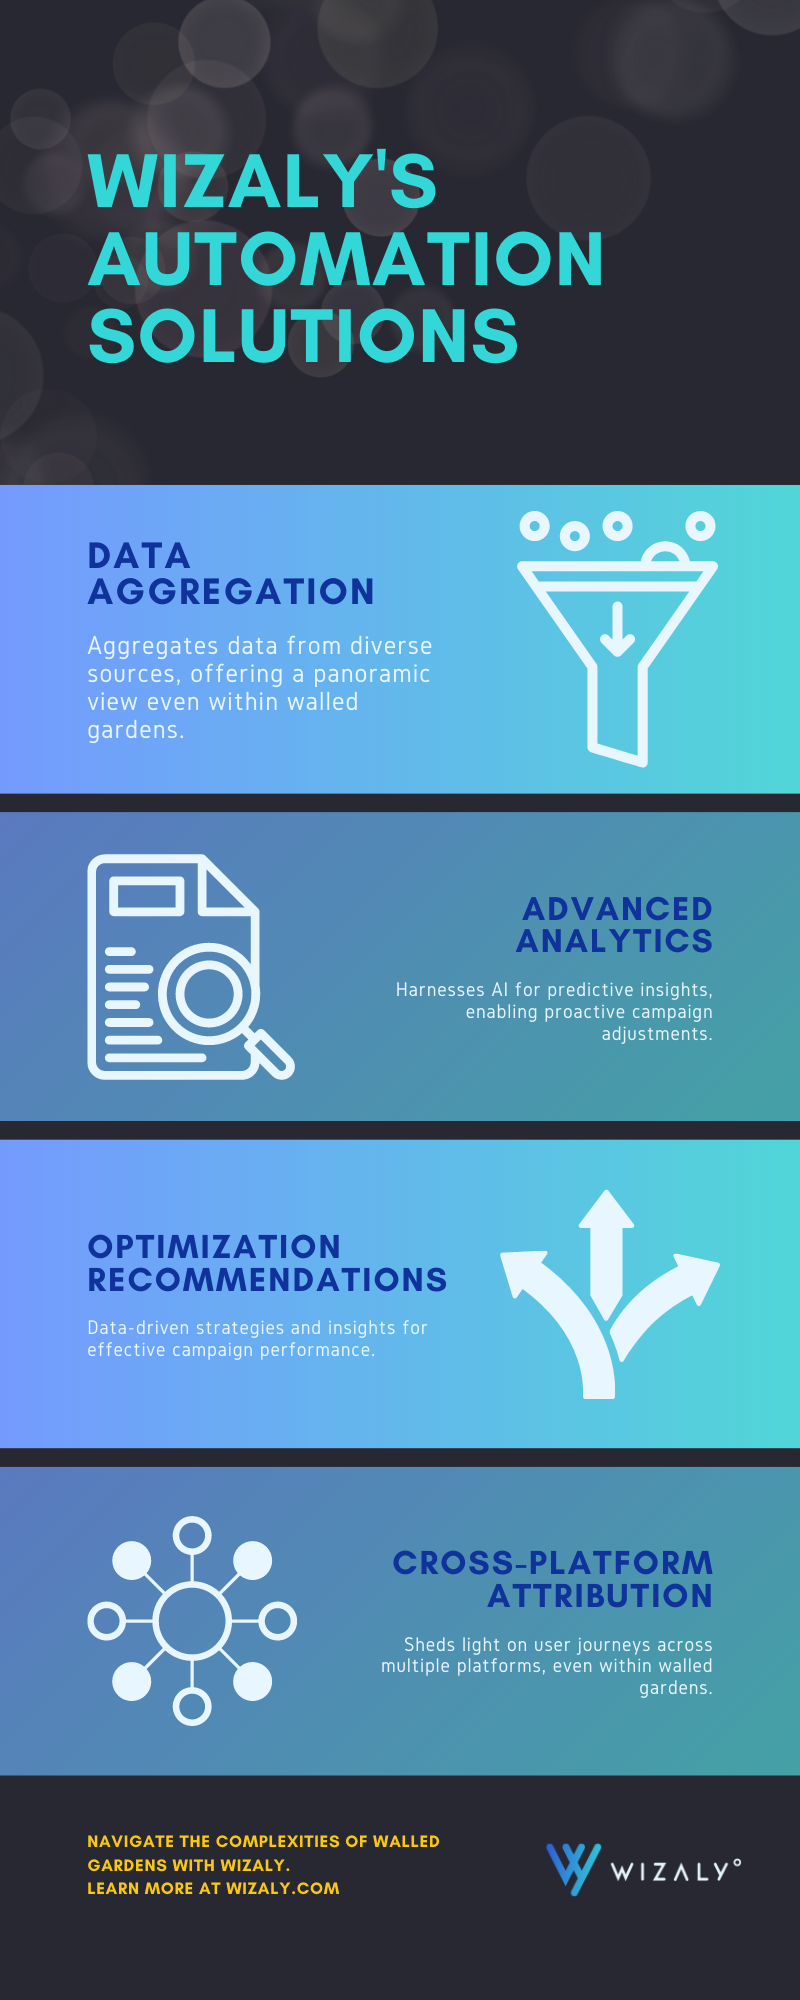 Wizzy's automation solutions infographic.